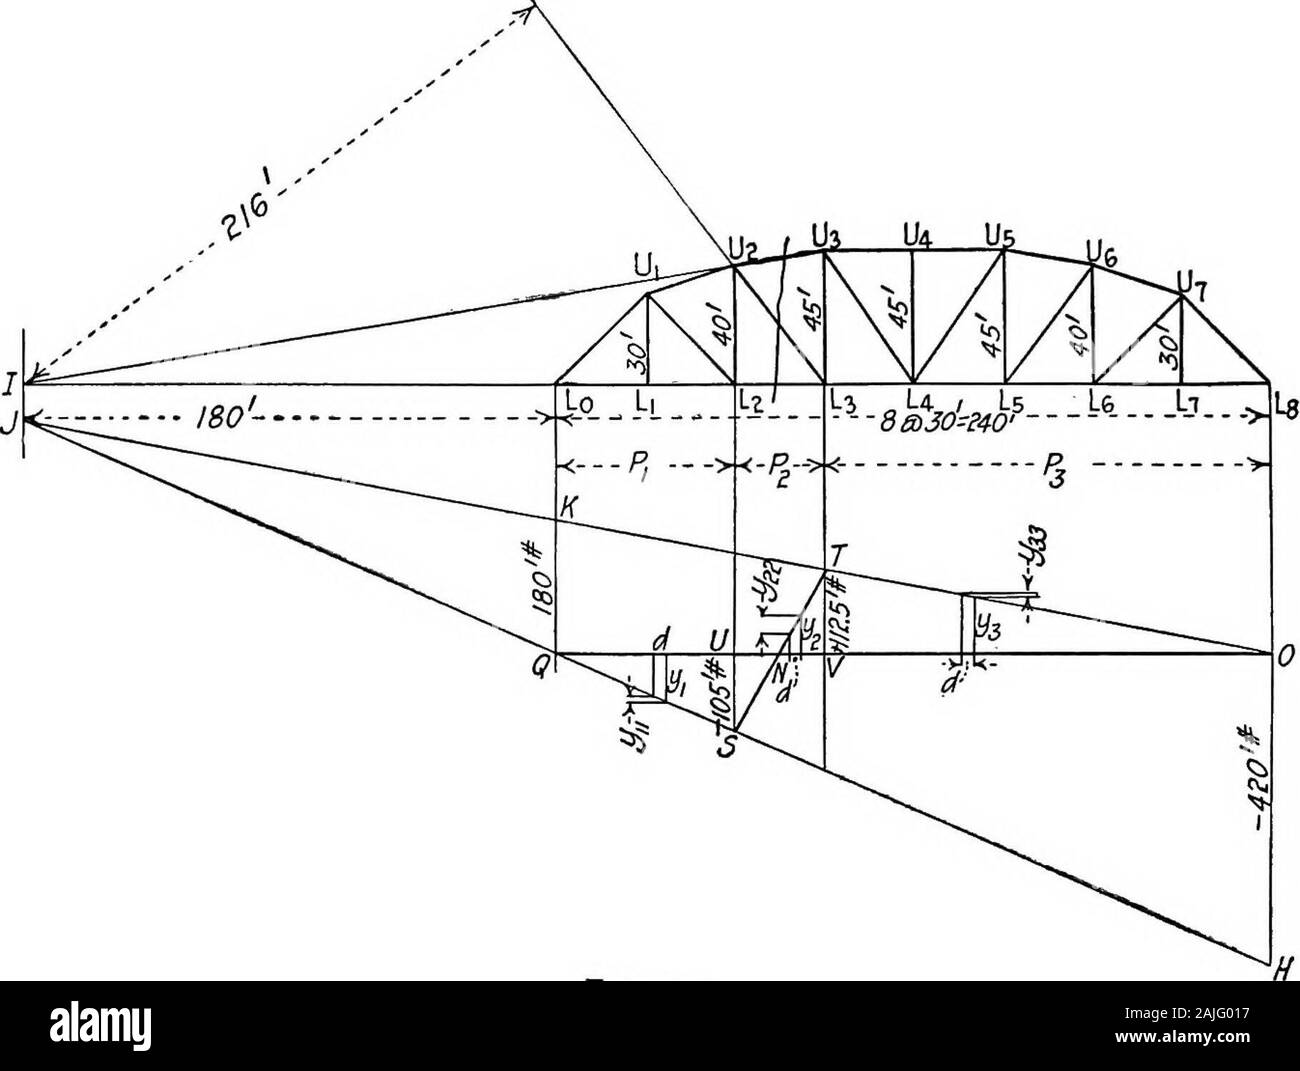 Essentials in the theory of framed structures . UzUi, and in practice is usually assumed the same as thestress in UzUi. Sec. IV. Parker Trusses 109. Stress in Web Member of Parker Truss.—It was shown in Article 99 that the criterion for maximum stress in anychord member of the Parker truss (Fig. 107) is the same as forthe corresponding member of the Pratt truss. It is true alsothat the criterion for maximum shear in any panel of theParker truss is the same as for the corresponding panel in thePratt truss. In a consideration of the maximum stresses forweb members, a clear distinction should be Stock Photo